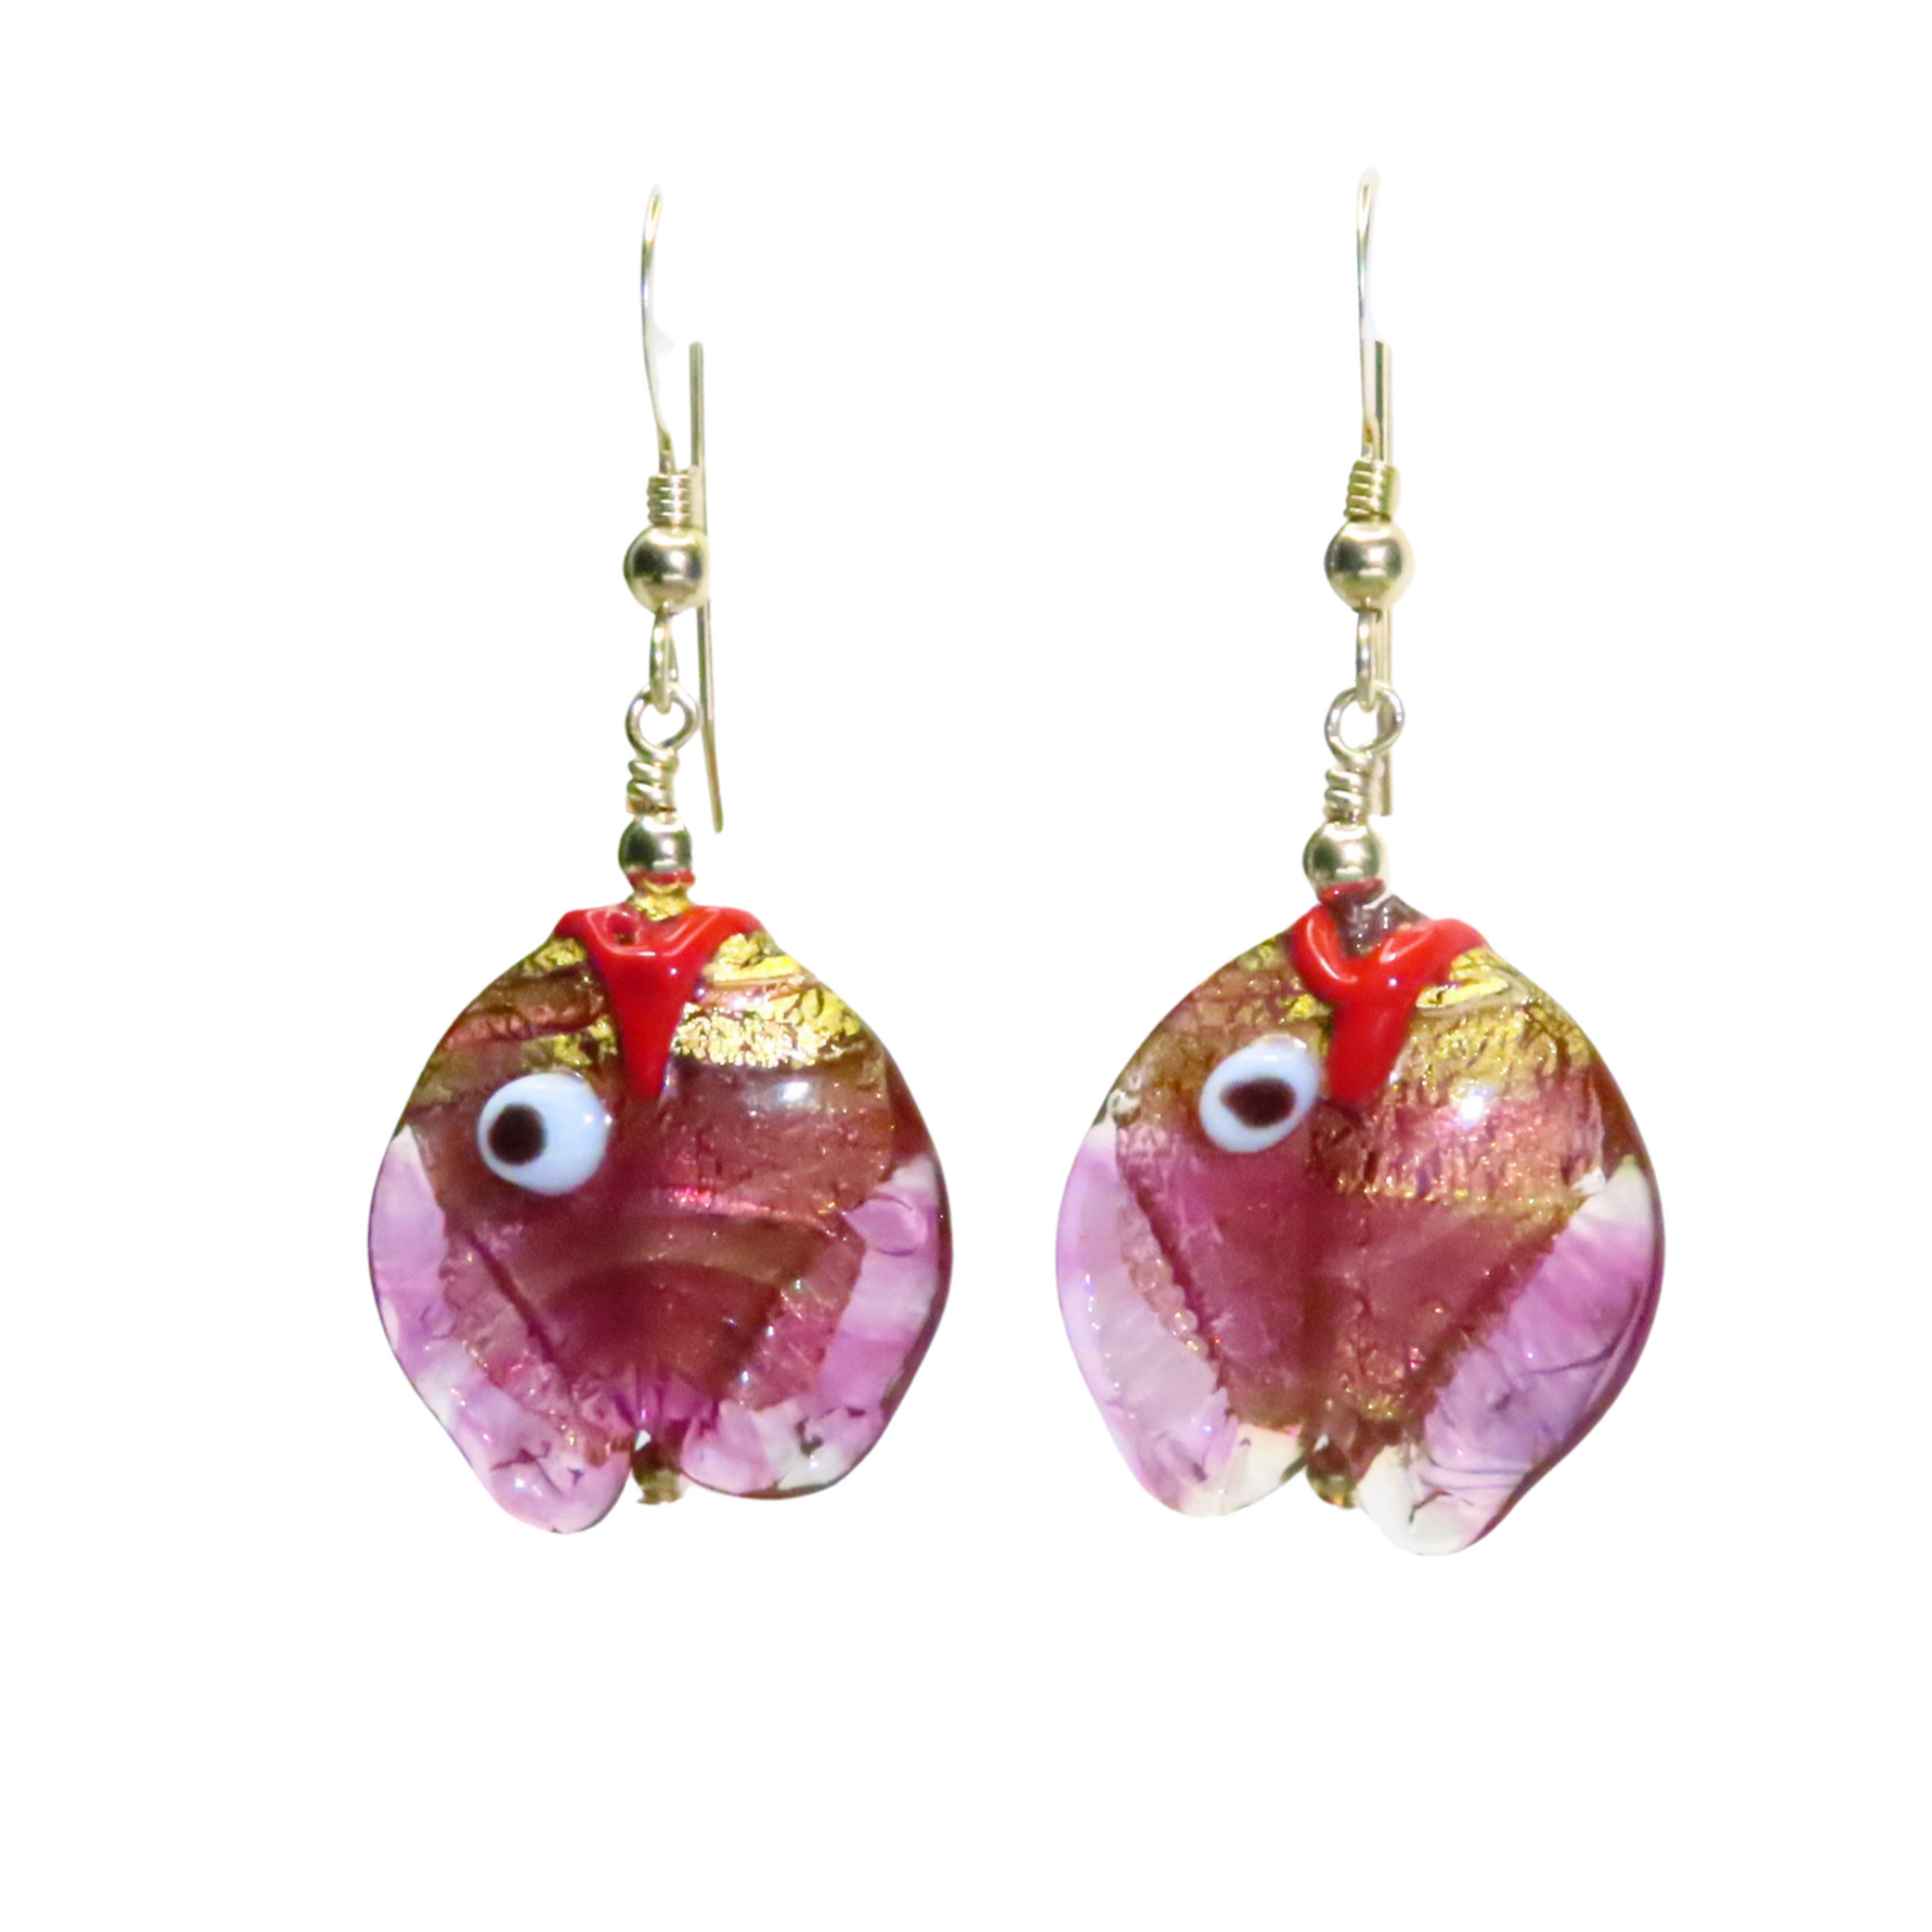 a pair of pink and gold earrings with a red bird on it